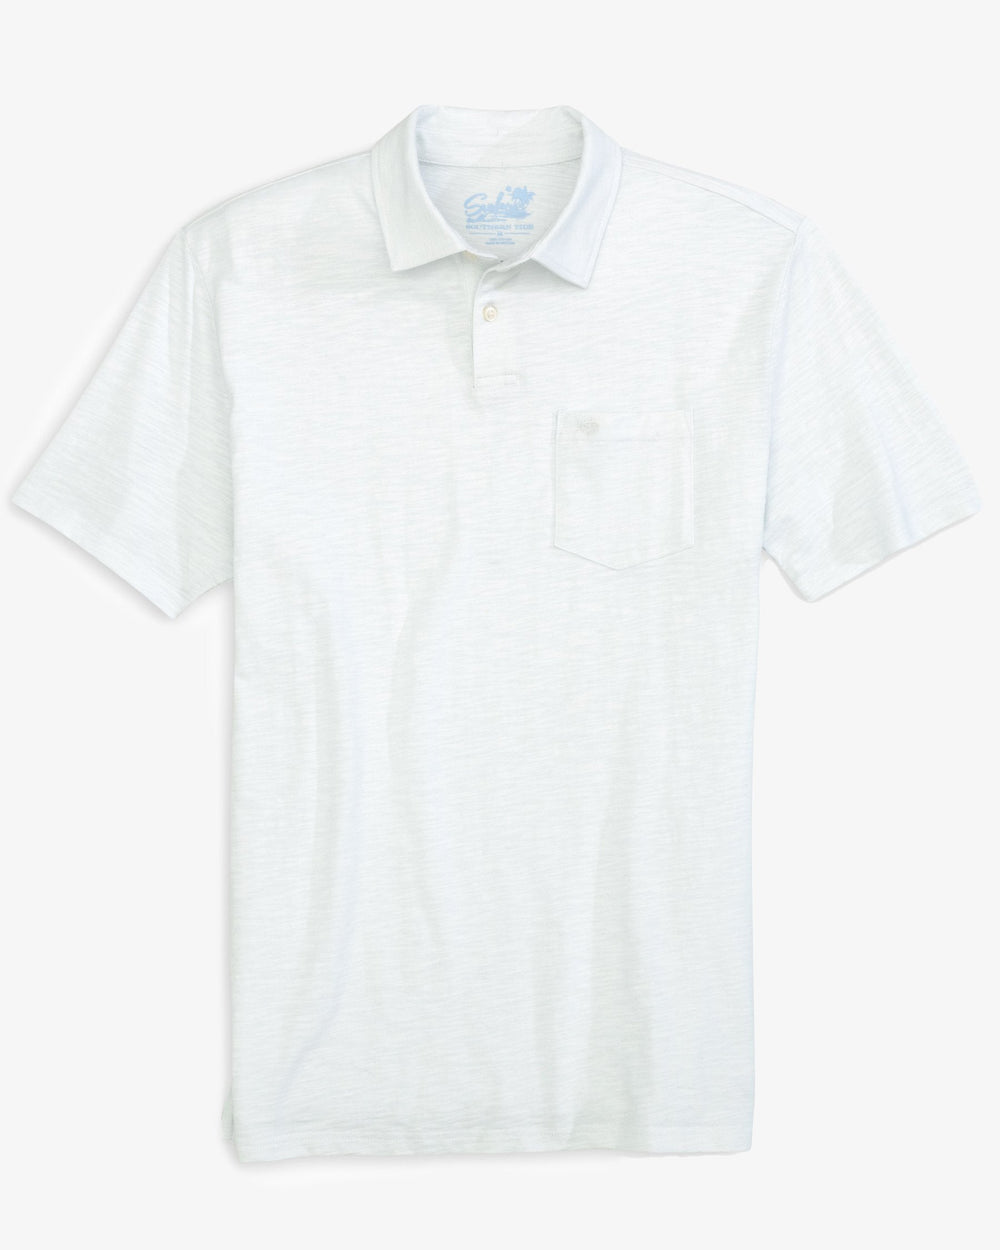 The front of the Men's Sun Farer Polo Shirt by Southern Tide - Classic White